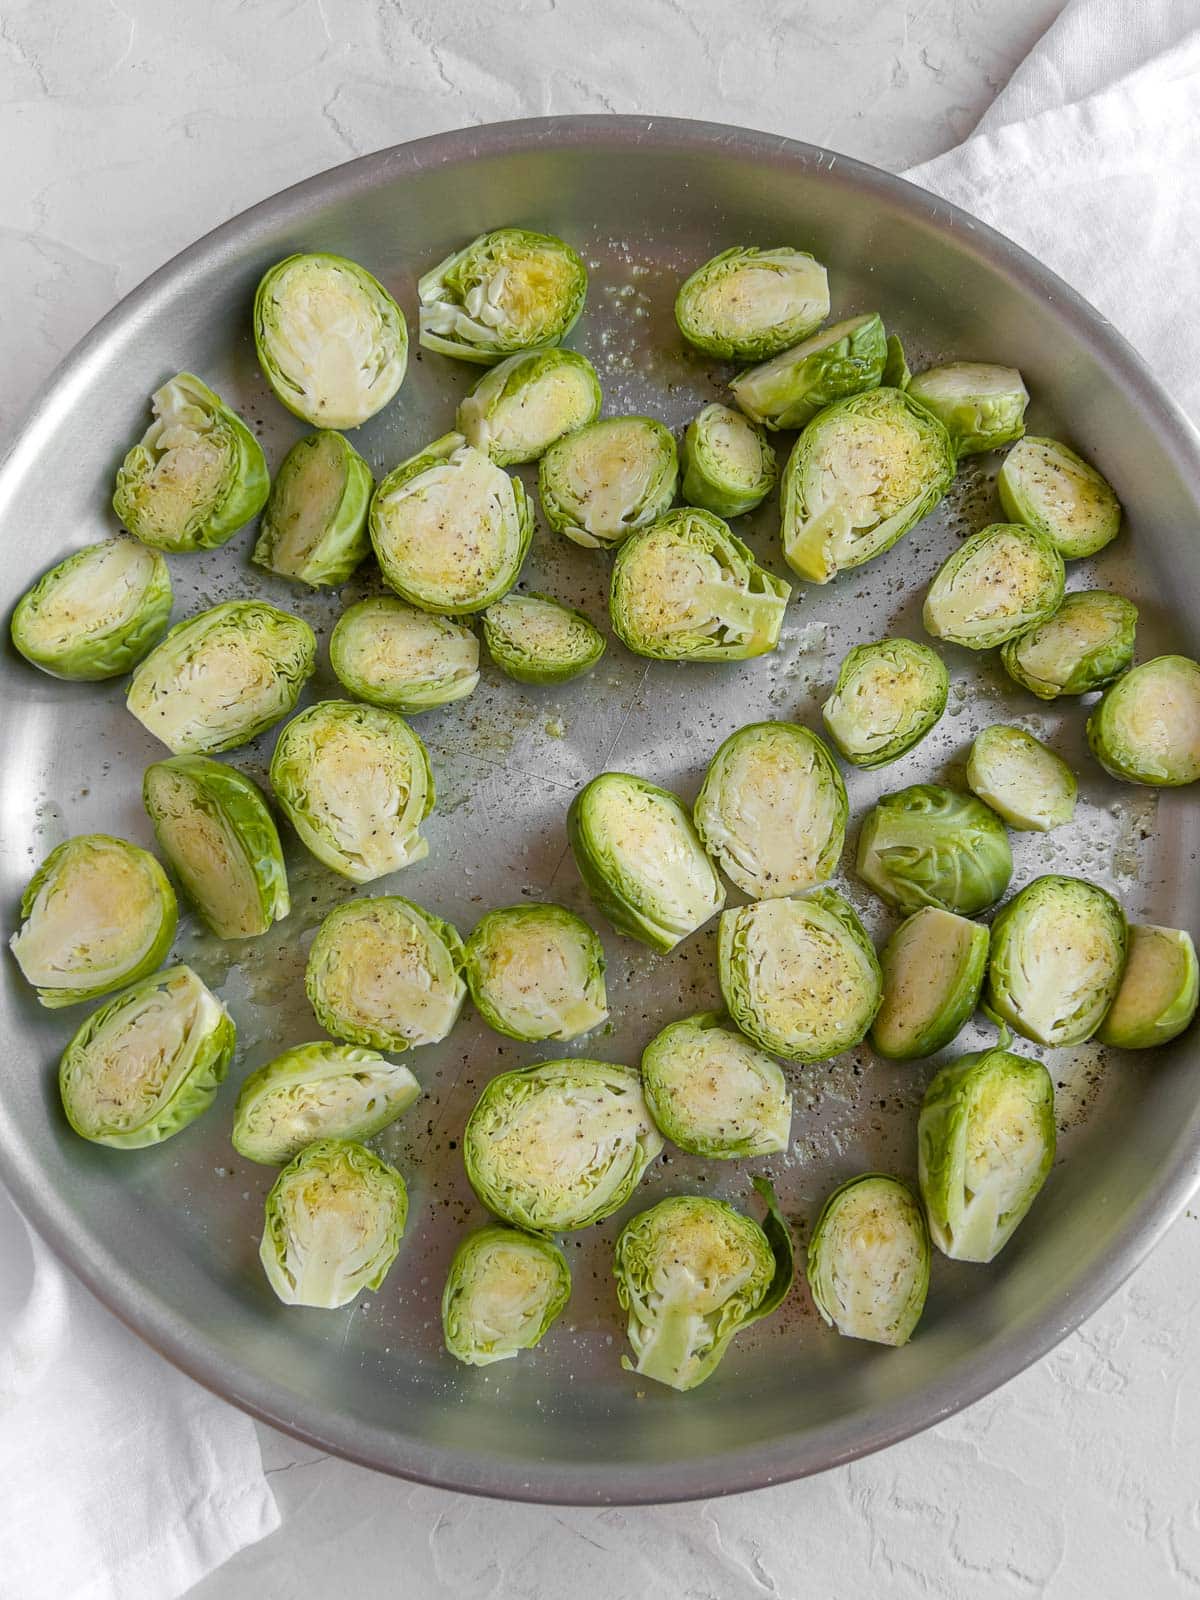 Brussels sprouts cut in half on a baking tray